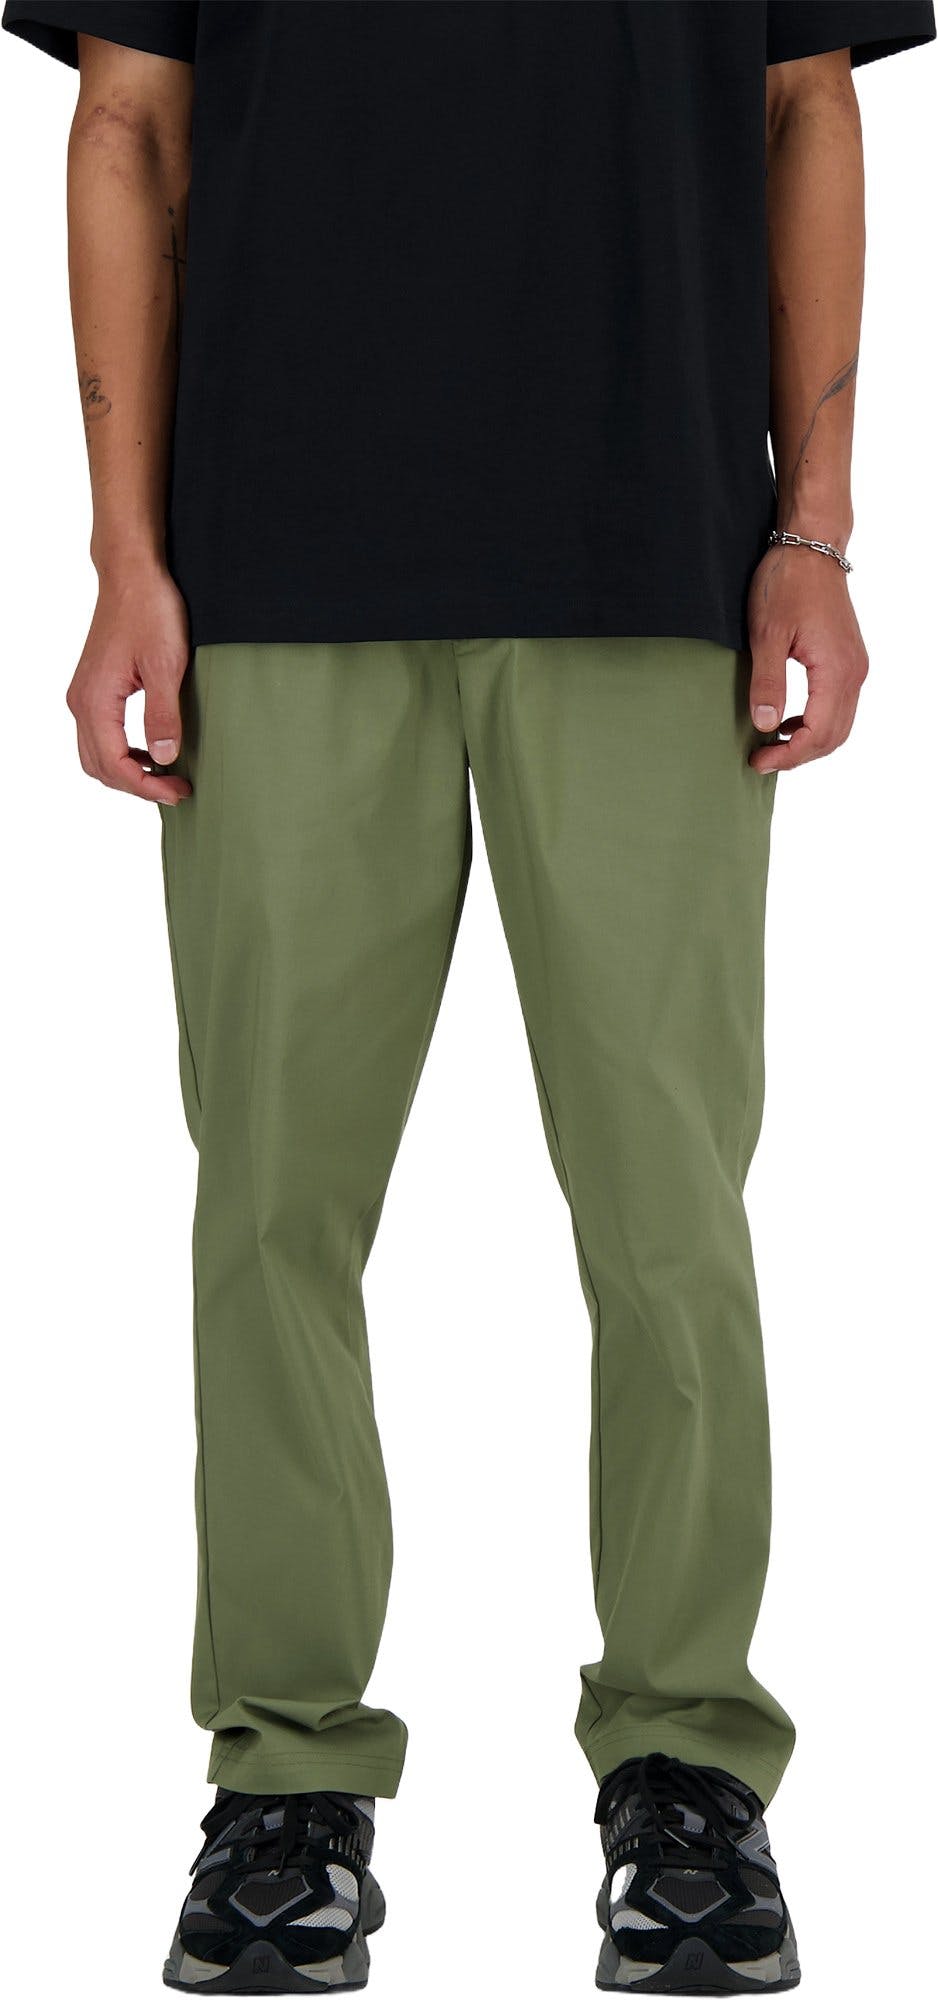 Product image for Twill Tapered Pant 30" - Men's